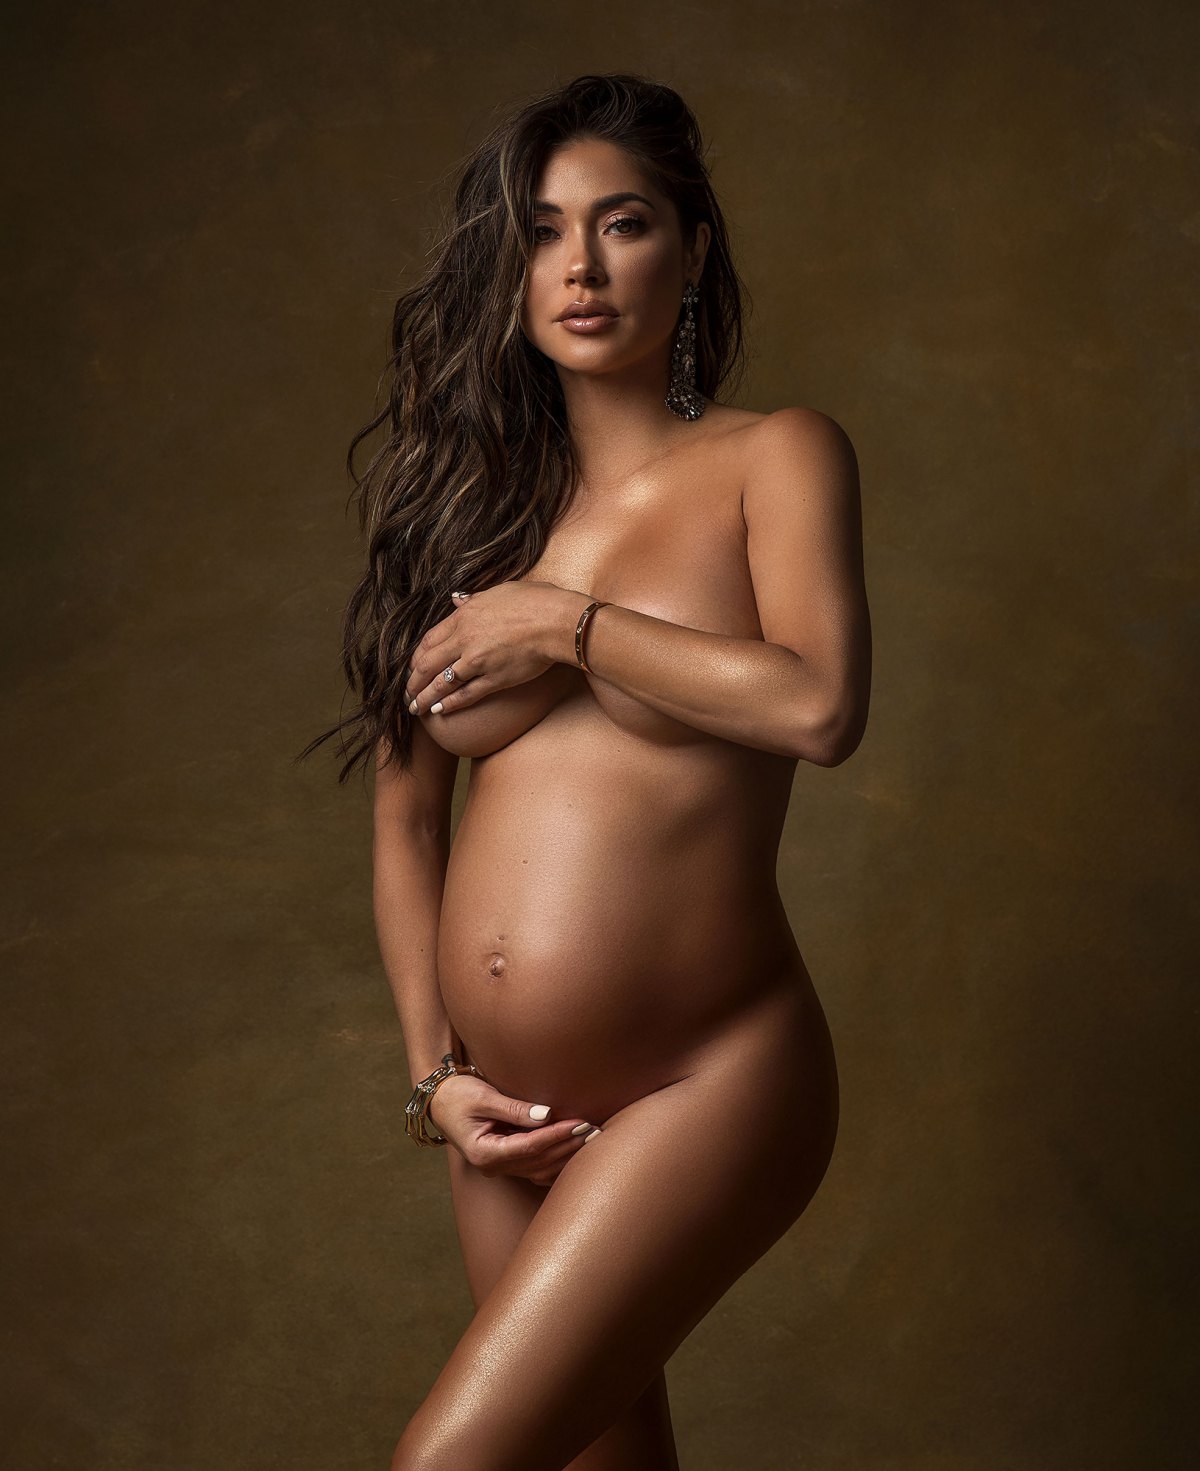 Pregnant Celebrity Nude Porn - Celebrities Posing Nude While Pregnant: Maternity Pics